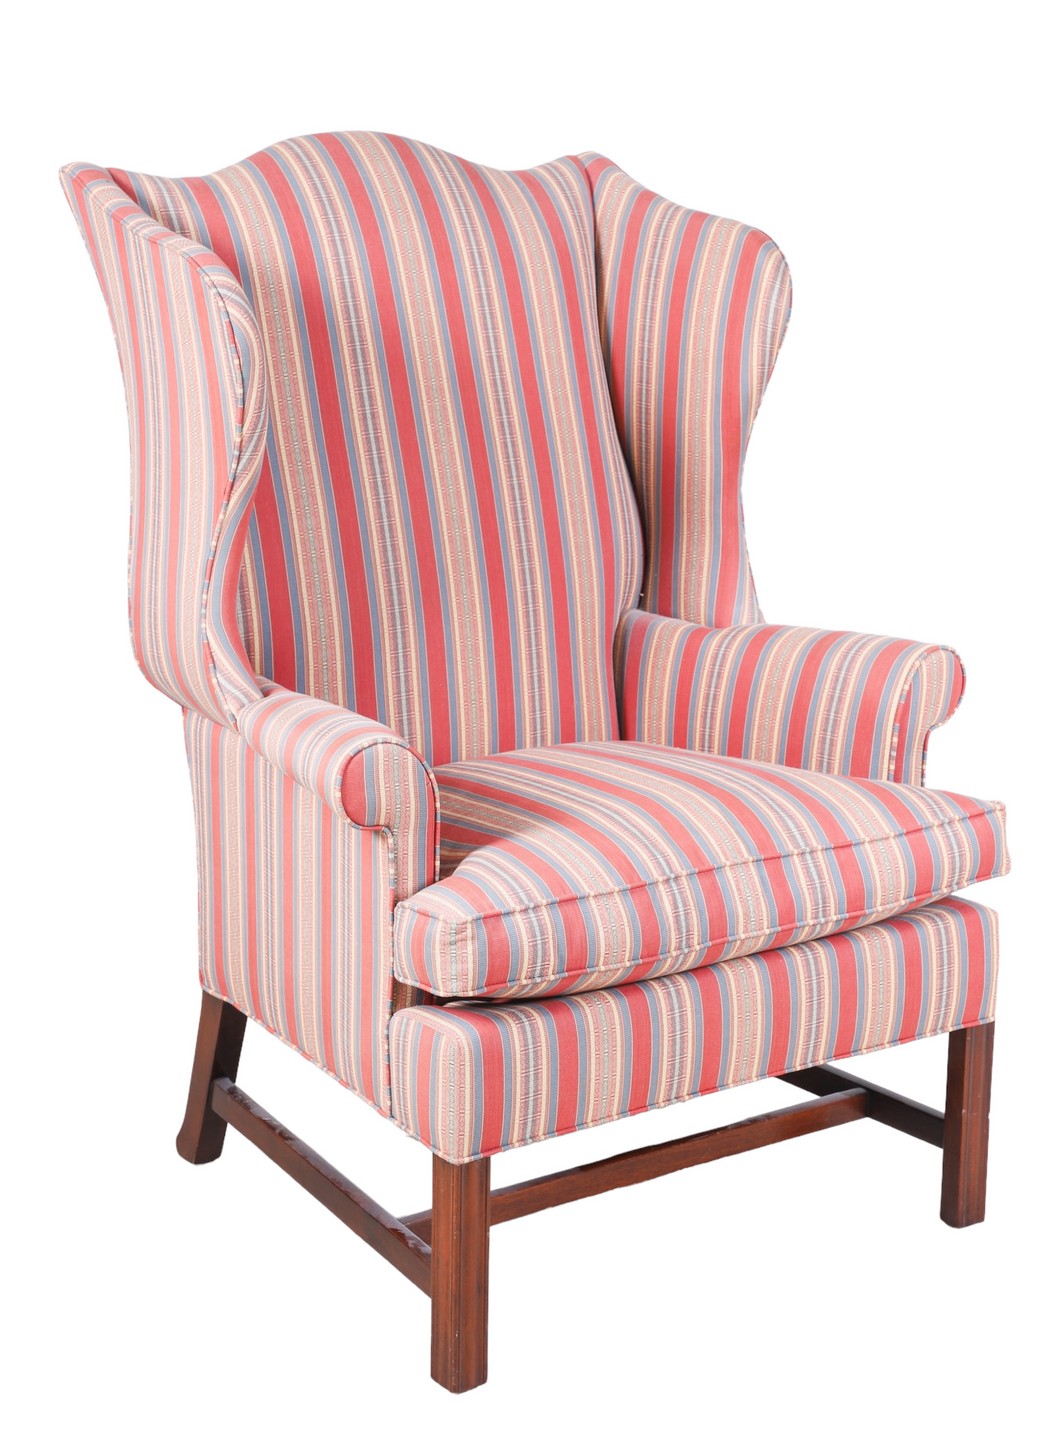 JJ Holley Chippendale style upholstered 27a4f7